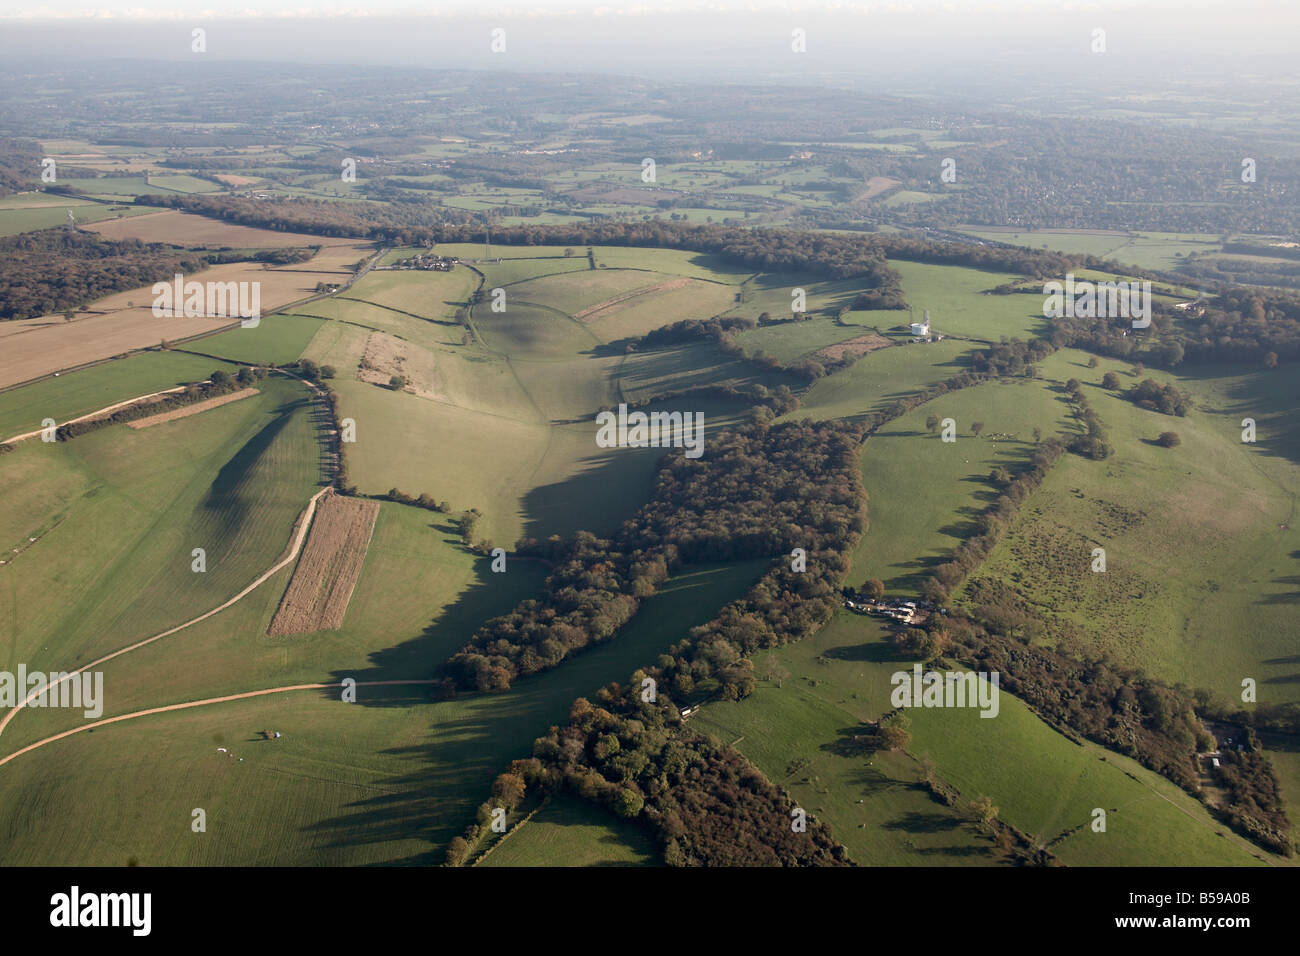 Aerial view south east of country fields trees Westerham Oxted Tandridge London TN16 RH9 England UK Stock Photo